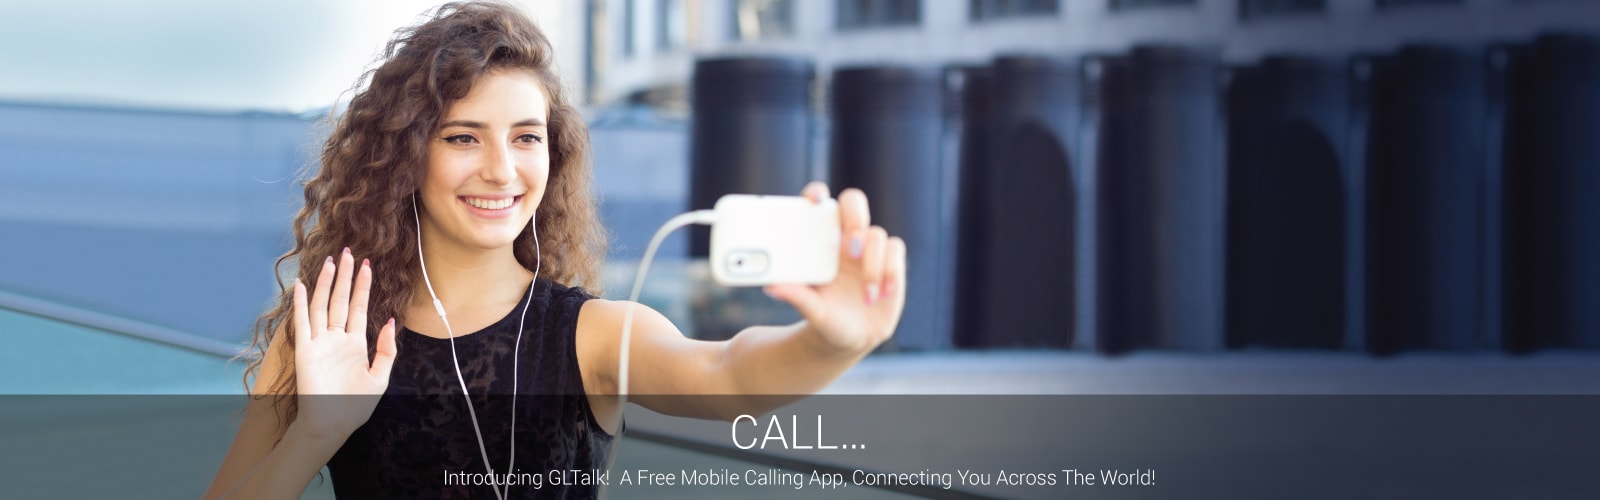 Introducing GLTalk! A Free Mobile Calling App, Connecting You Across The World!